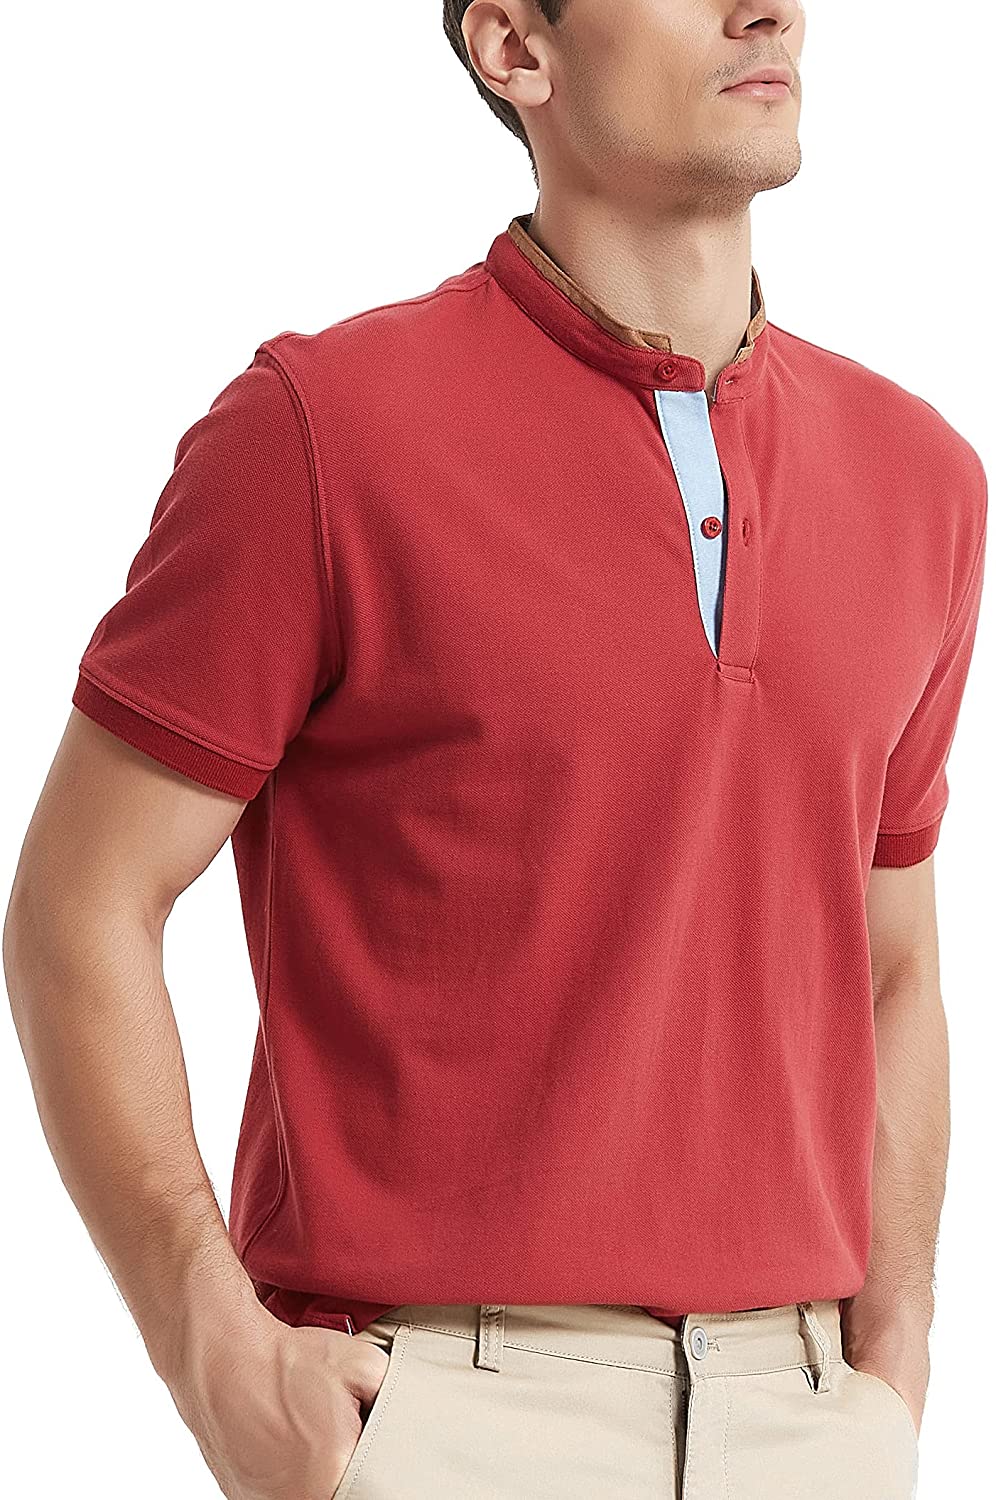 GAVIN BLEU Cotton Collared Polo Shirts for Men Classic Fit